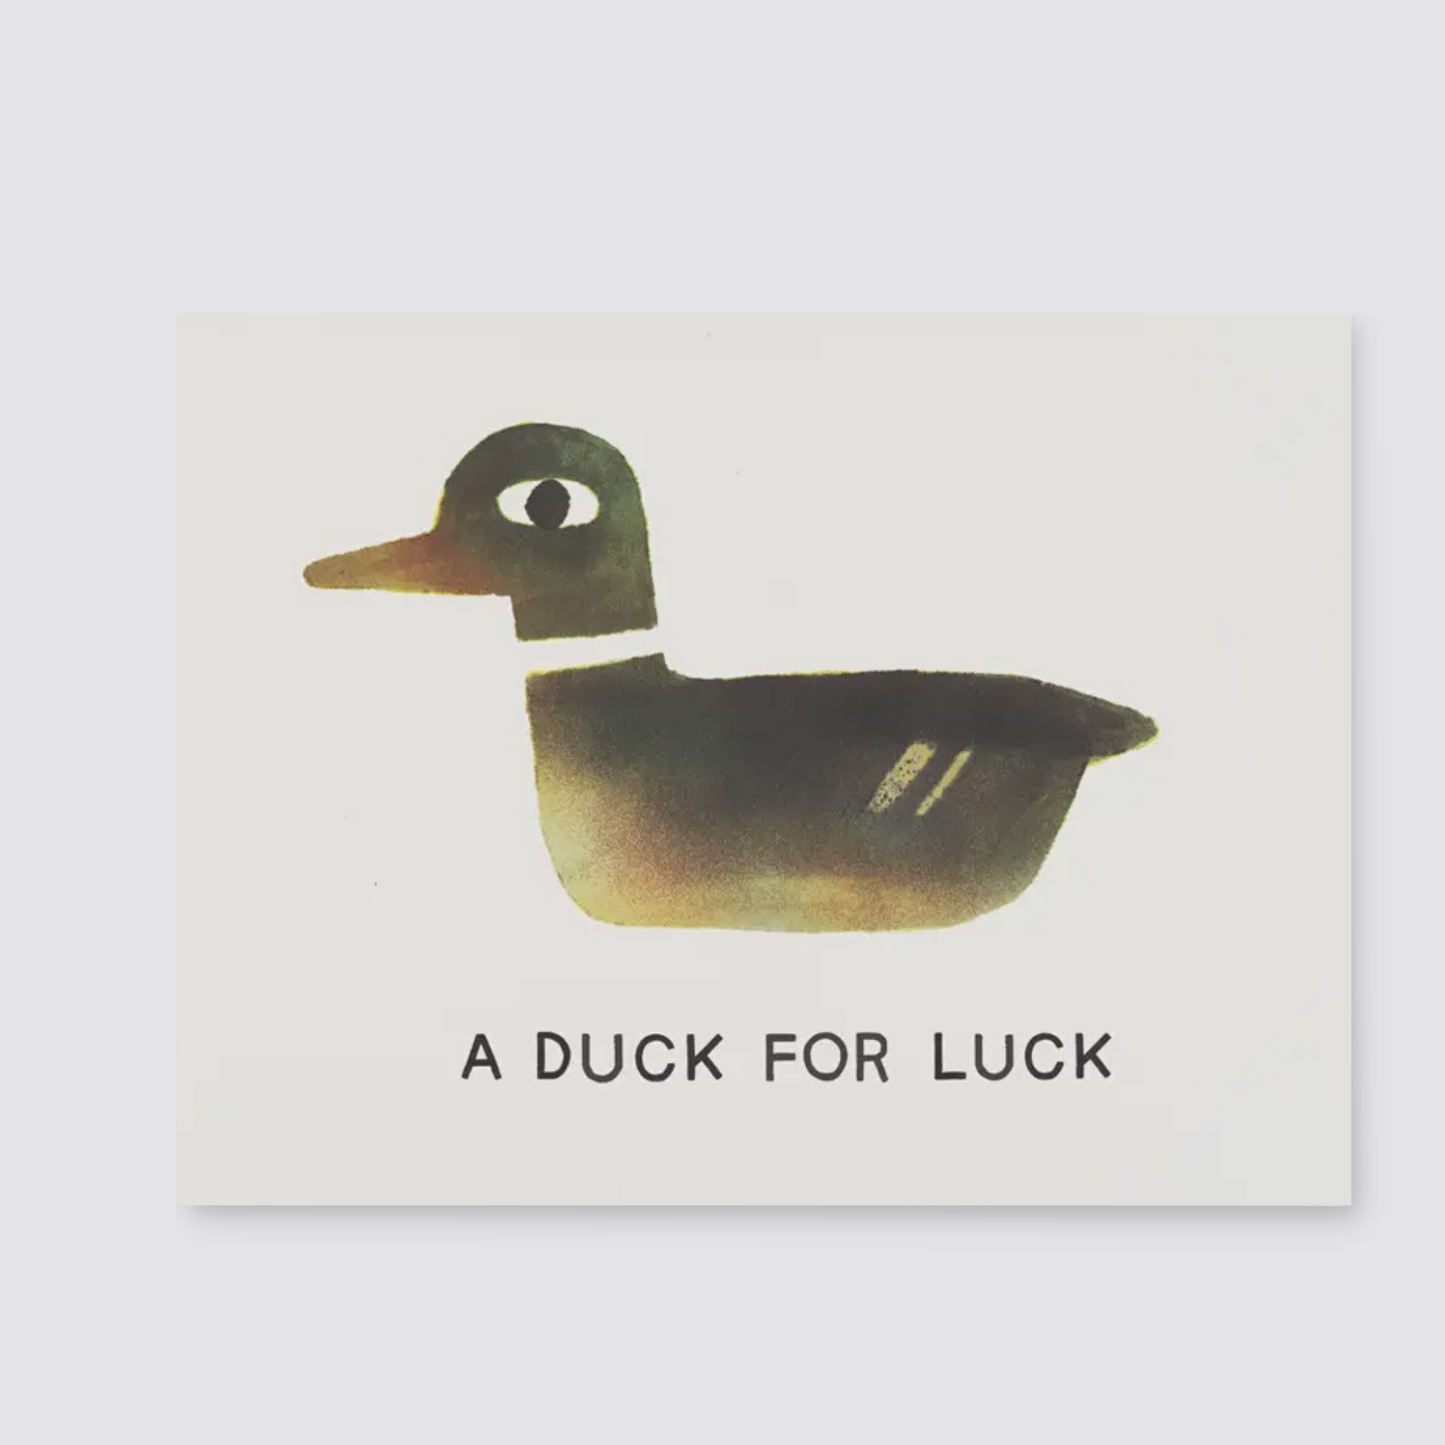 A duck for luck